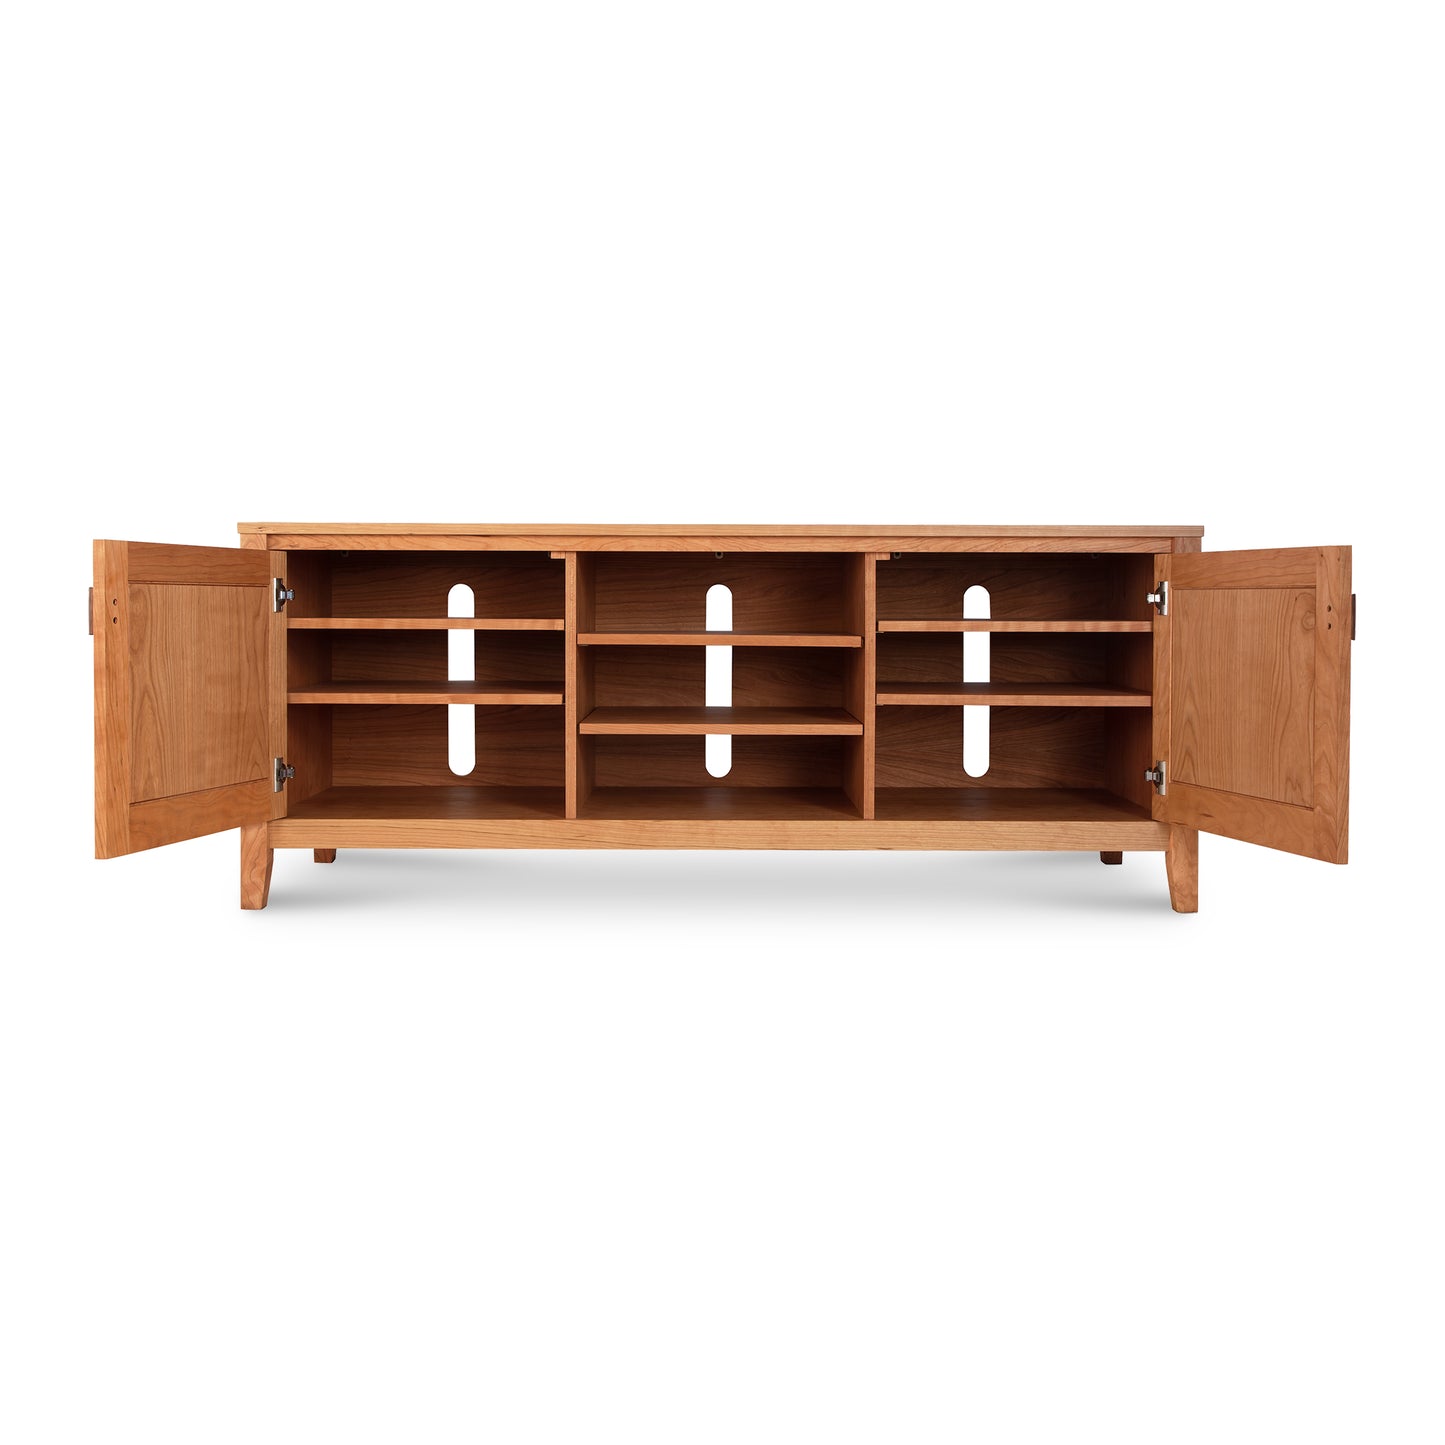 A long, wooden TV stand with multiple open compartments and side cabinets open, showcasing interior shelves from the Andover Modern 64" TV Stand by Maple Corner Woodworks. The stand is featured against a plain white background.